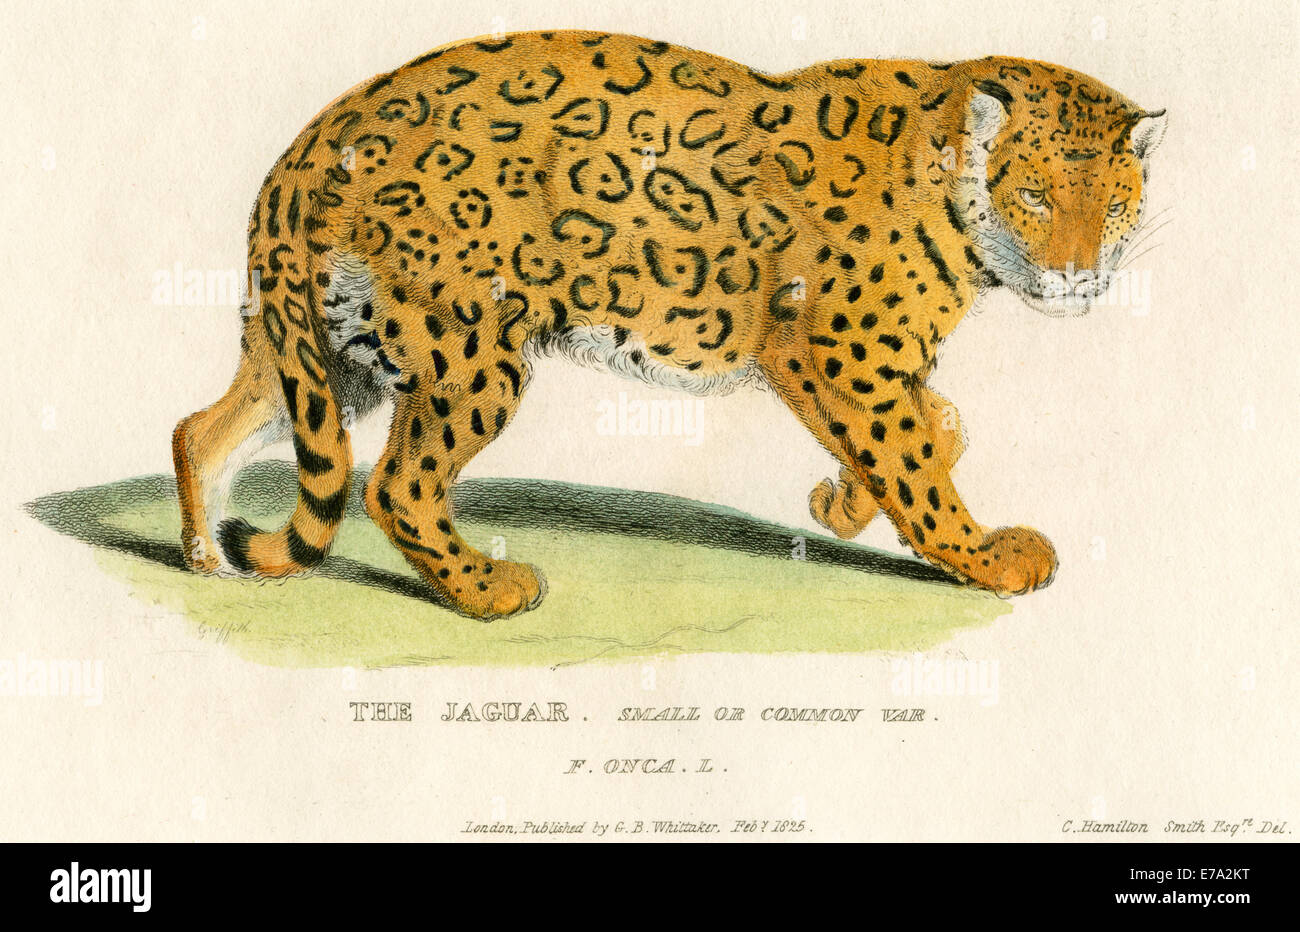 The Jaguar, Small or Common Variety, Hand-Colored Engraving, 1825 Stock Photo